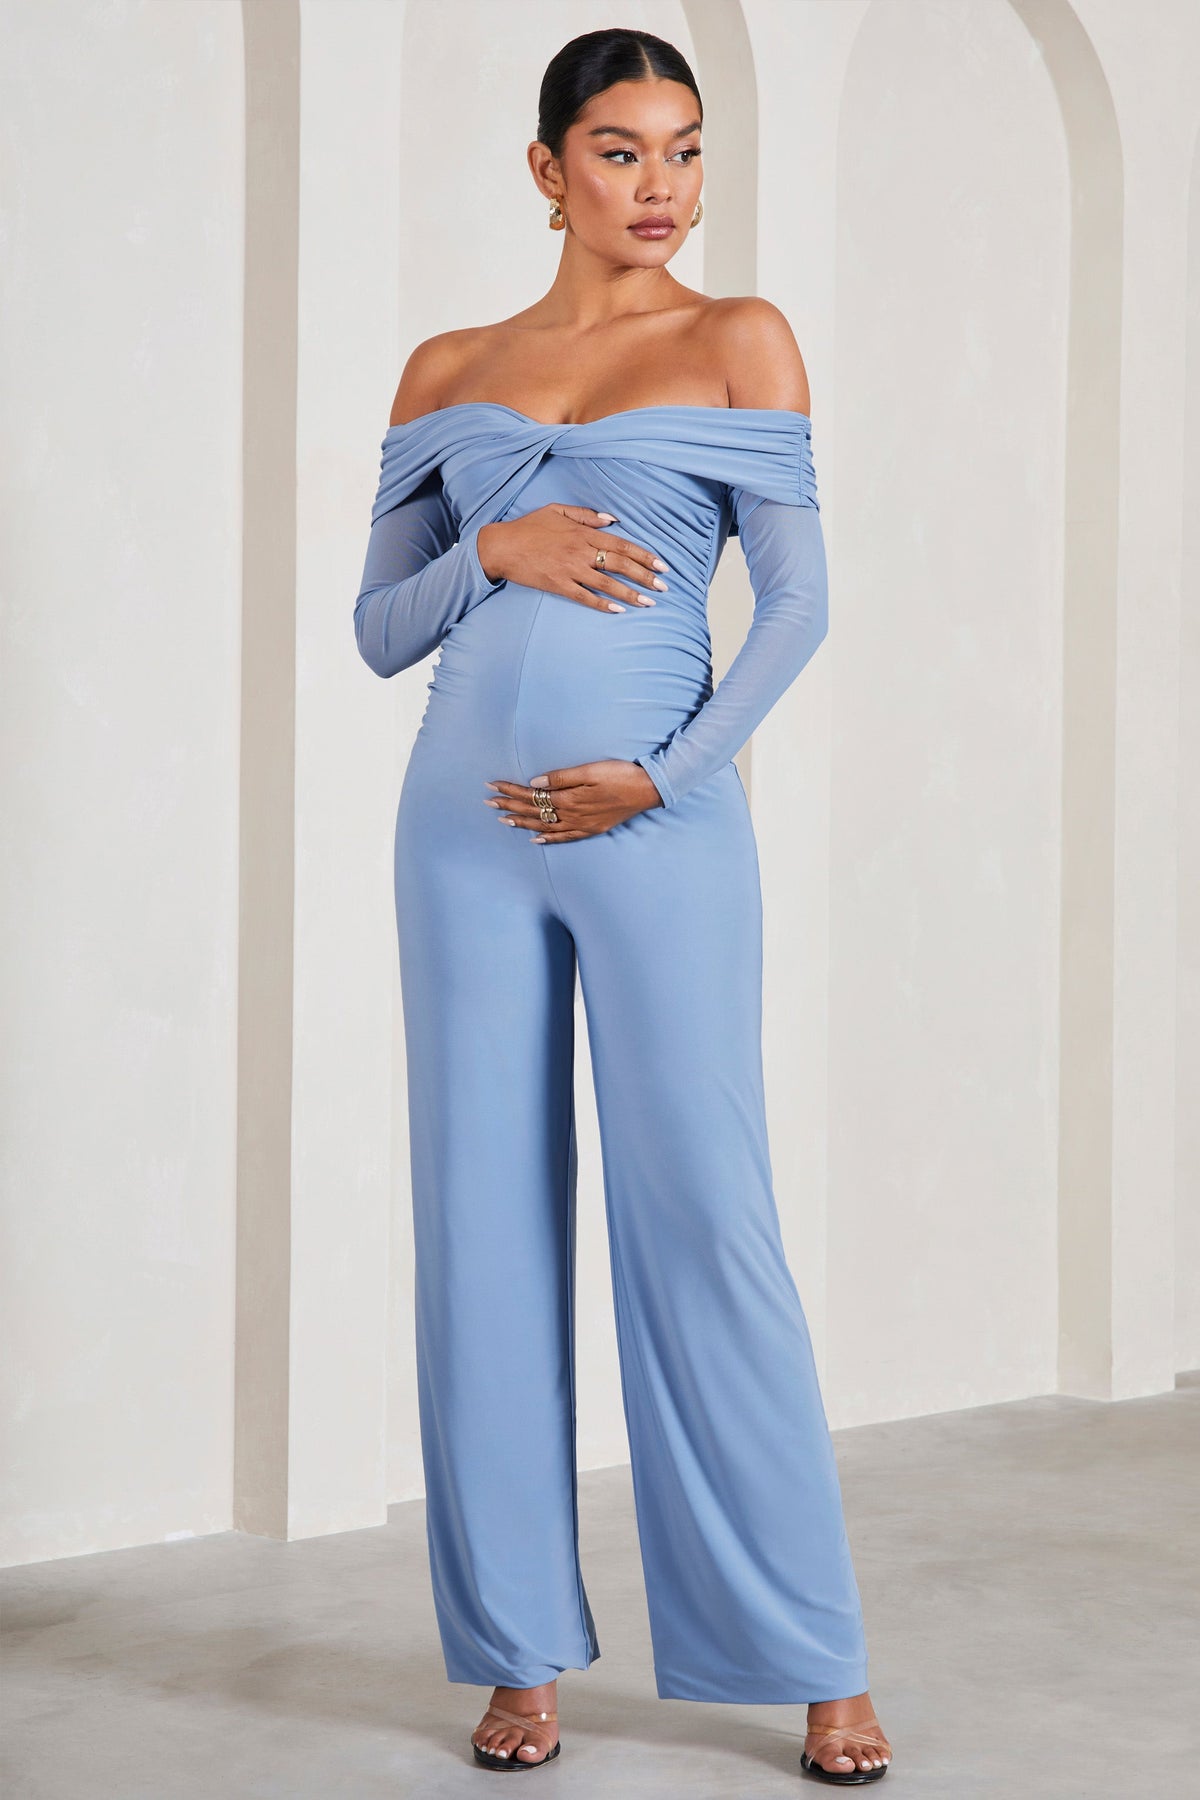 Count Down, Powder Blue Maternity Ruched Mesh Bardot Jumpsuit